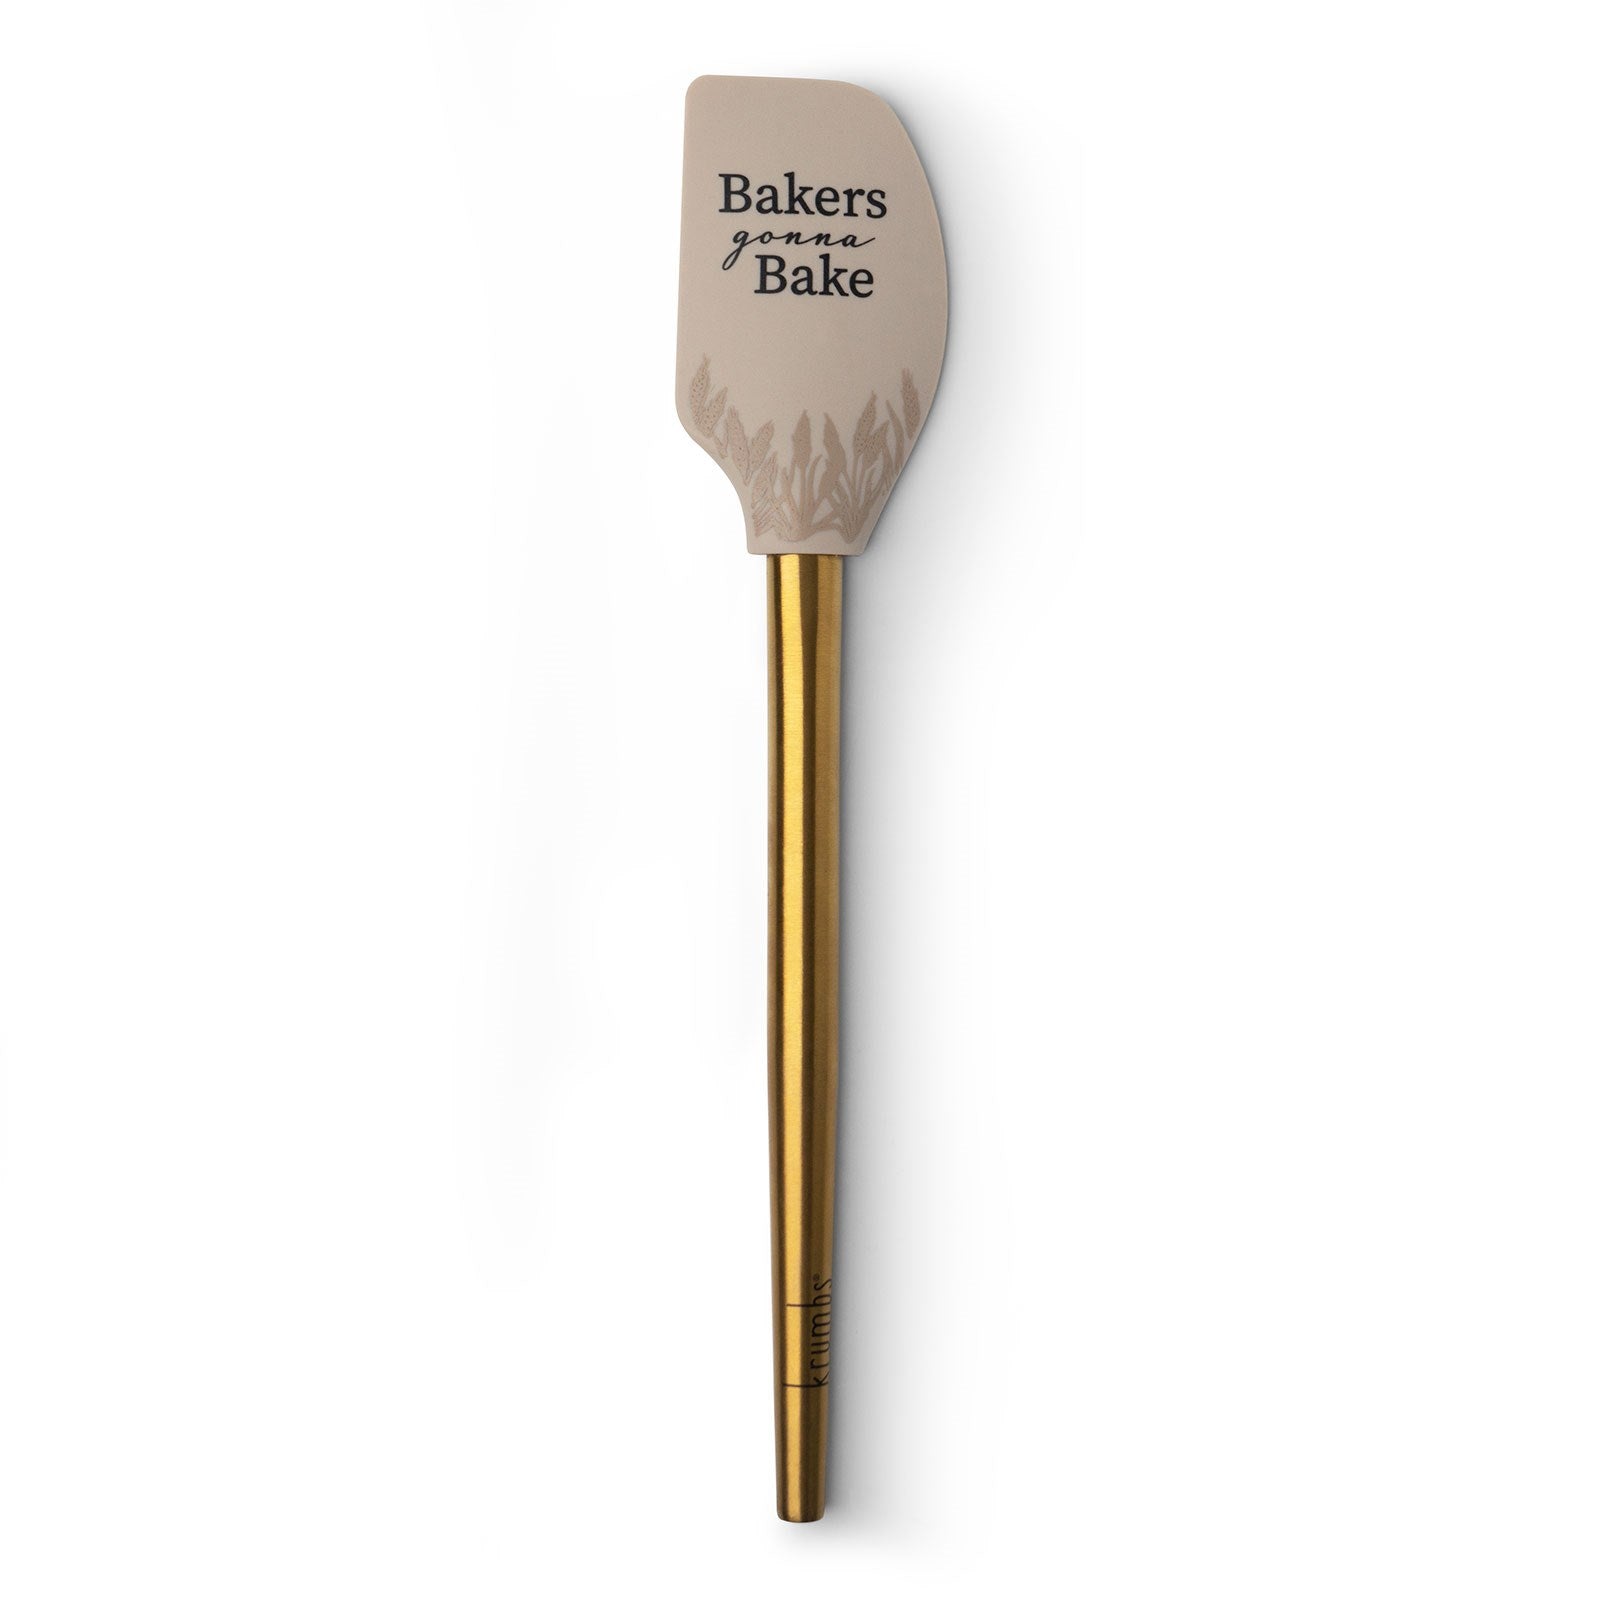 bakers gonna bake elements spatula on a white background